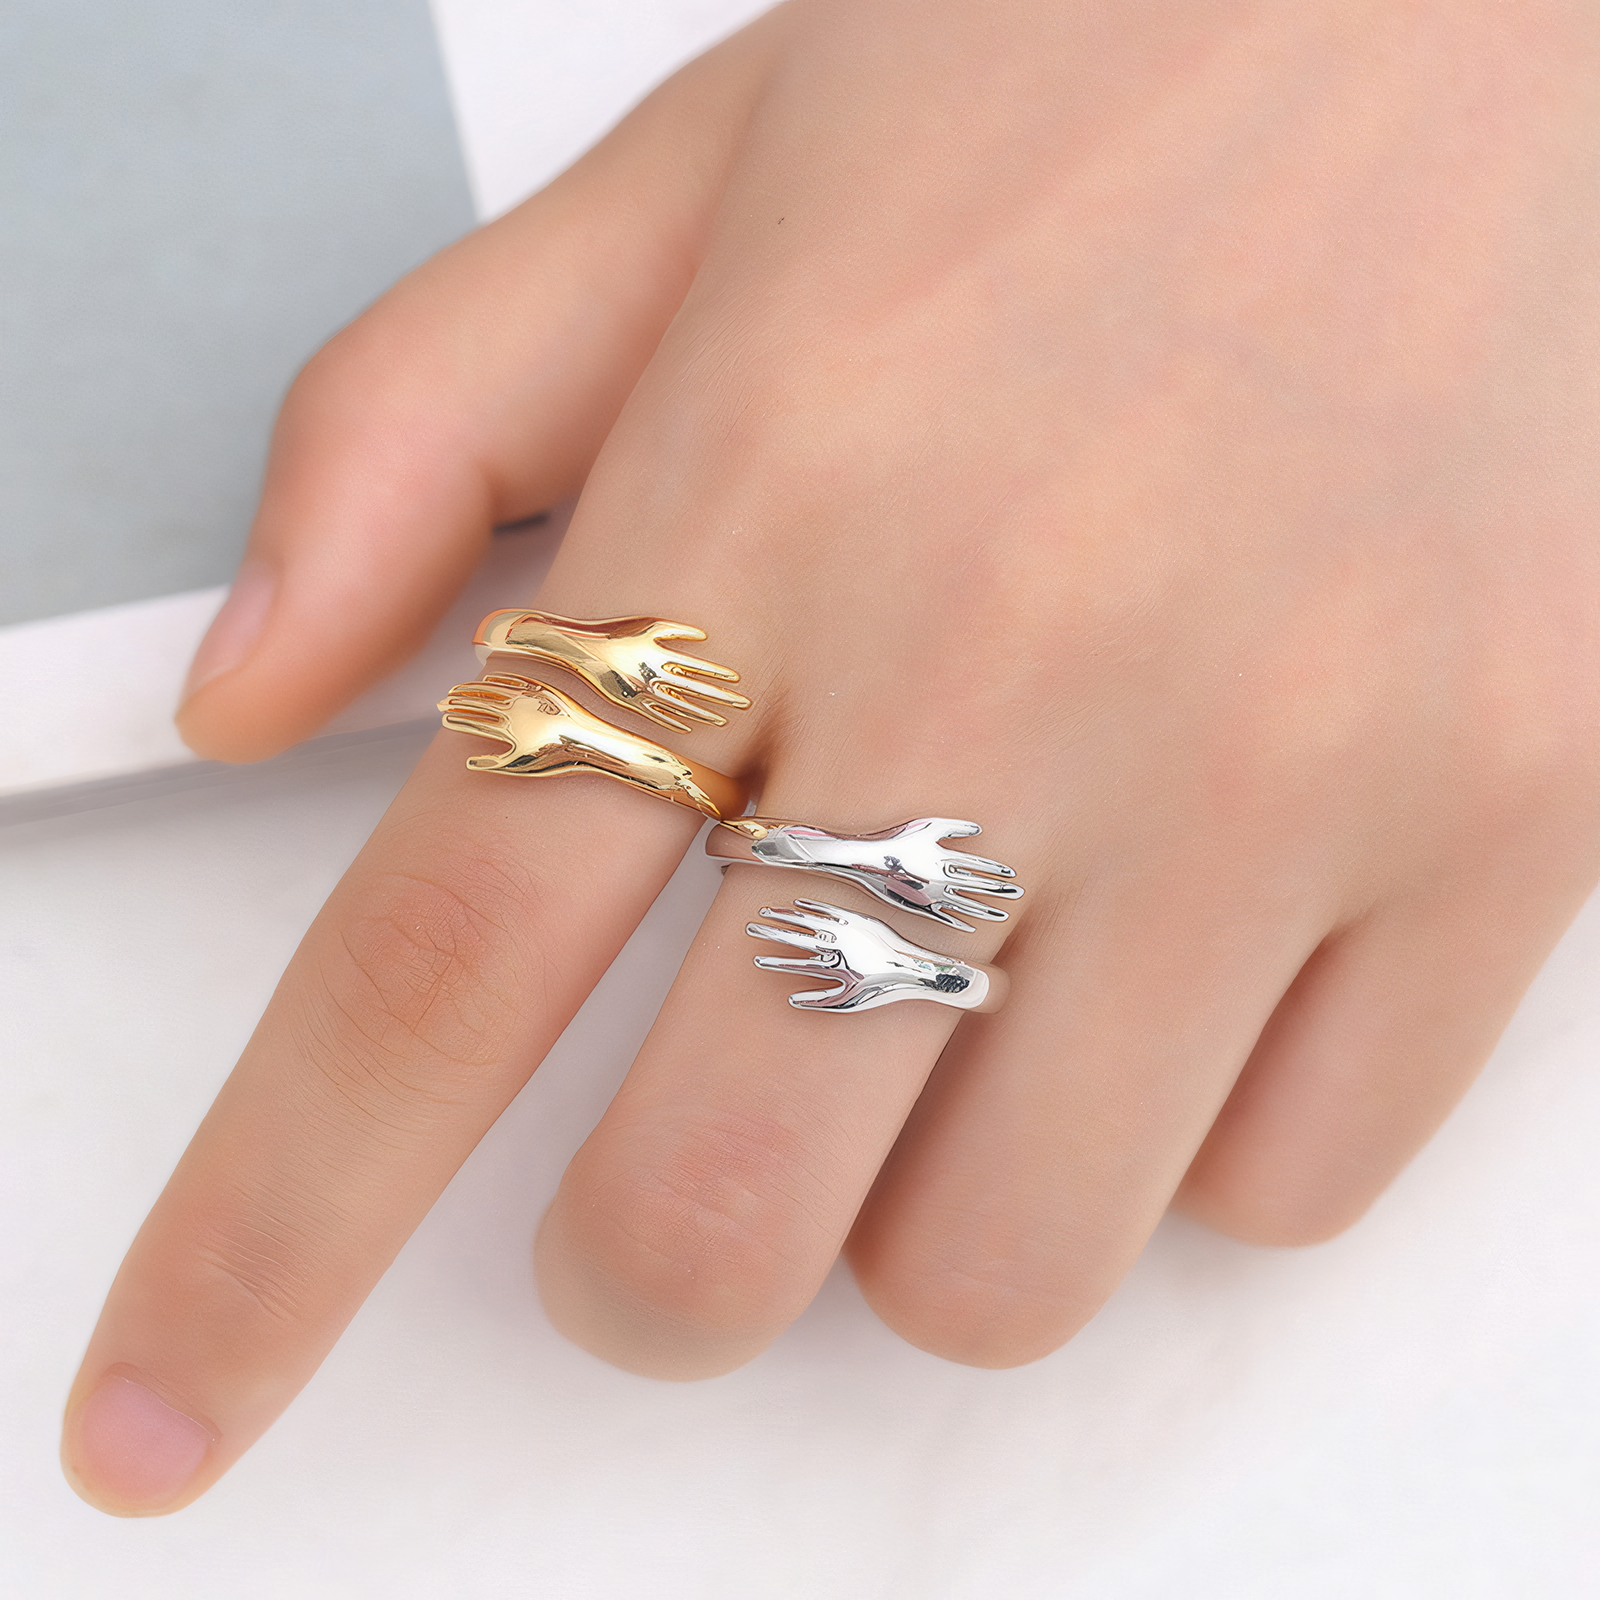 Adjustable Embracing Arms Sterling Silver Ring